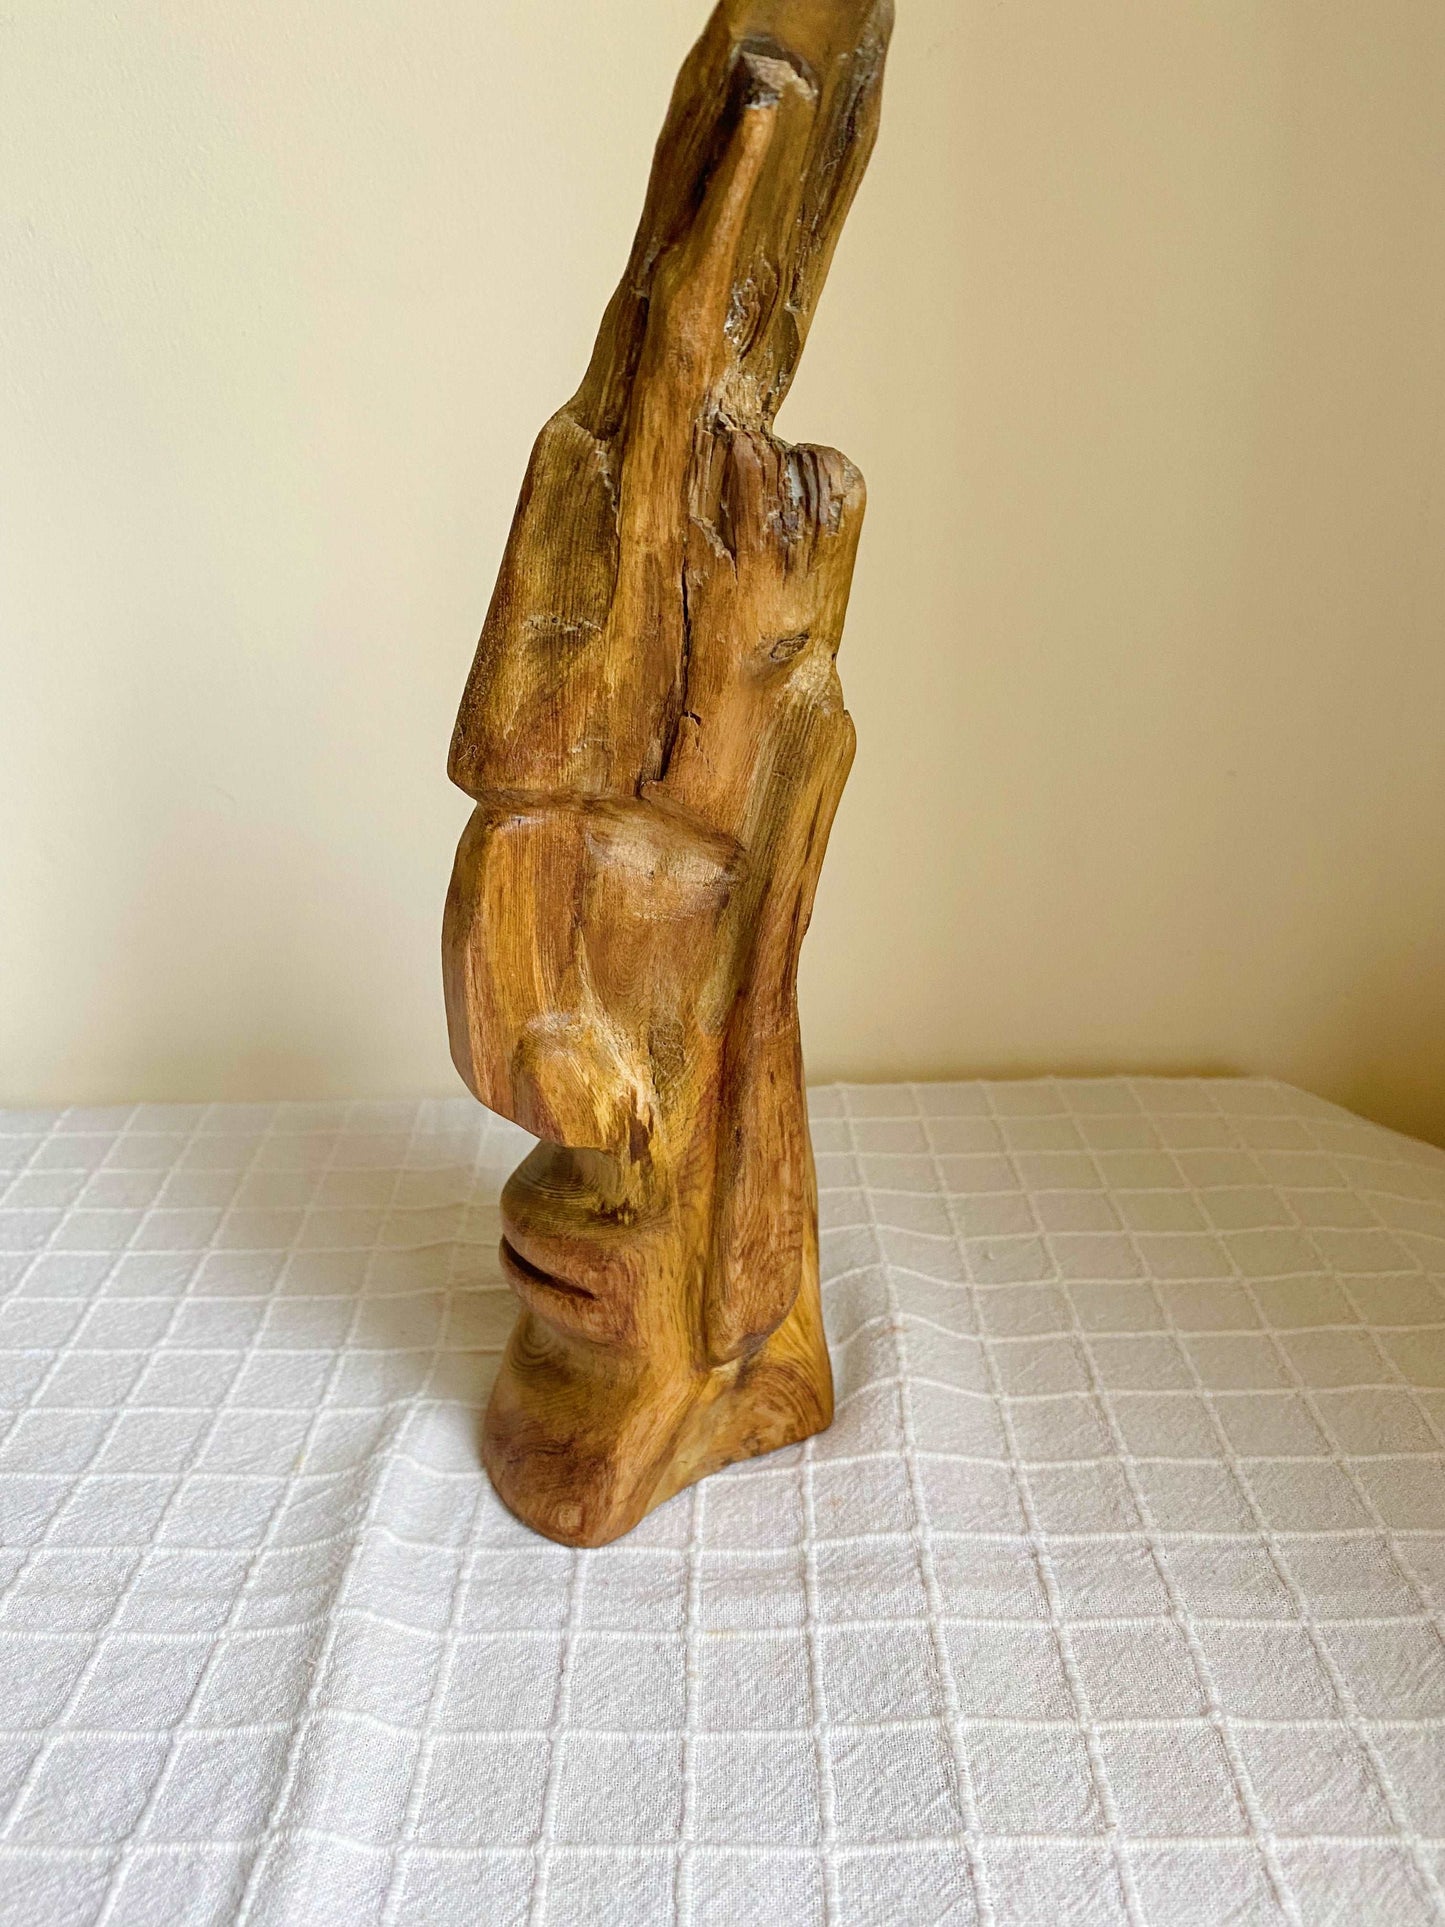 Hand Carved Easter Island Head Sculpture from Irish Bog Pine (soft wood) ranging in age from 3000 to 8000